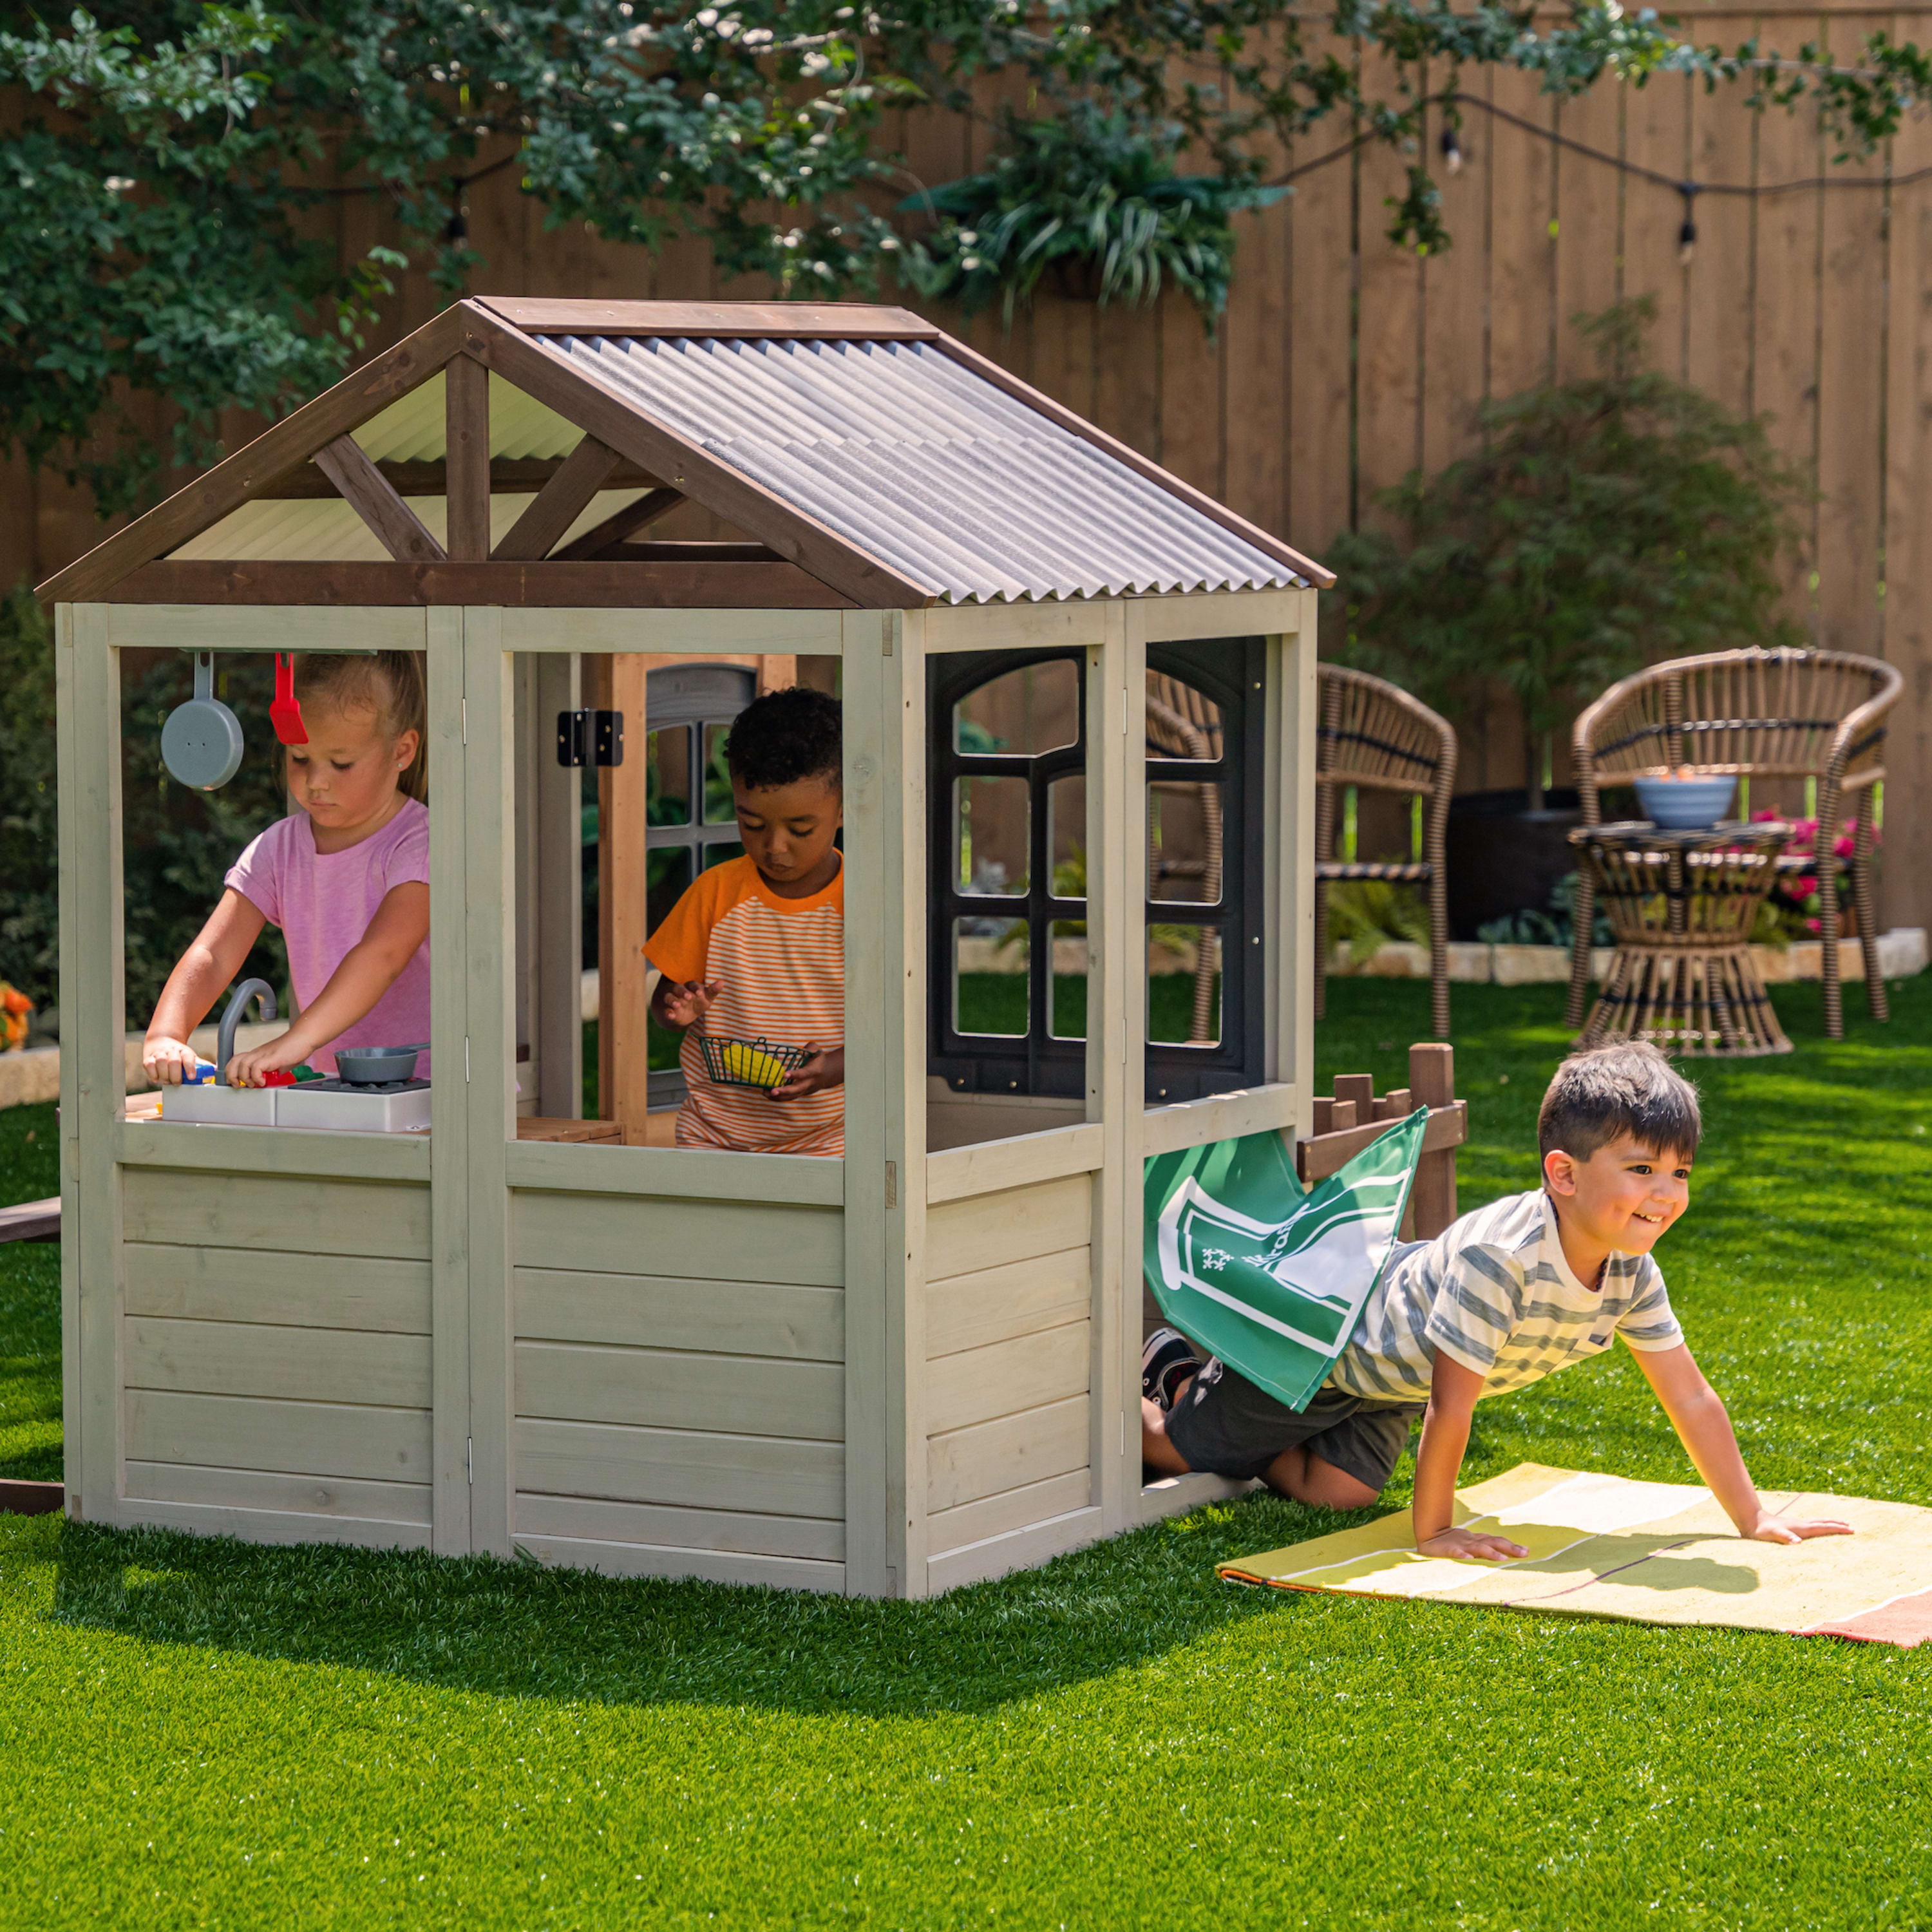 Victorian-style with Fenced Patio Your Little Toddler Will Love This Playhouse 4 ft 